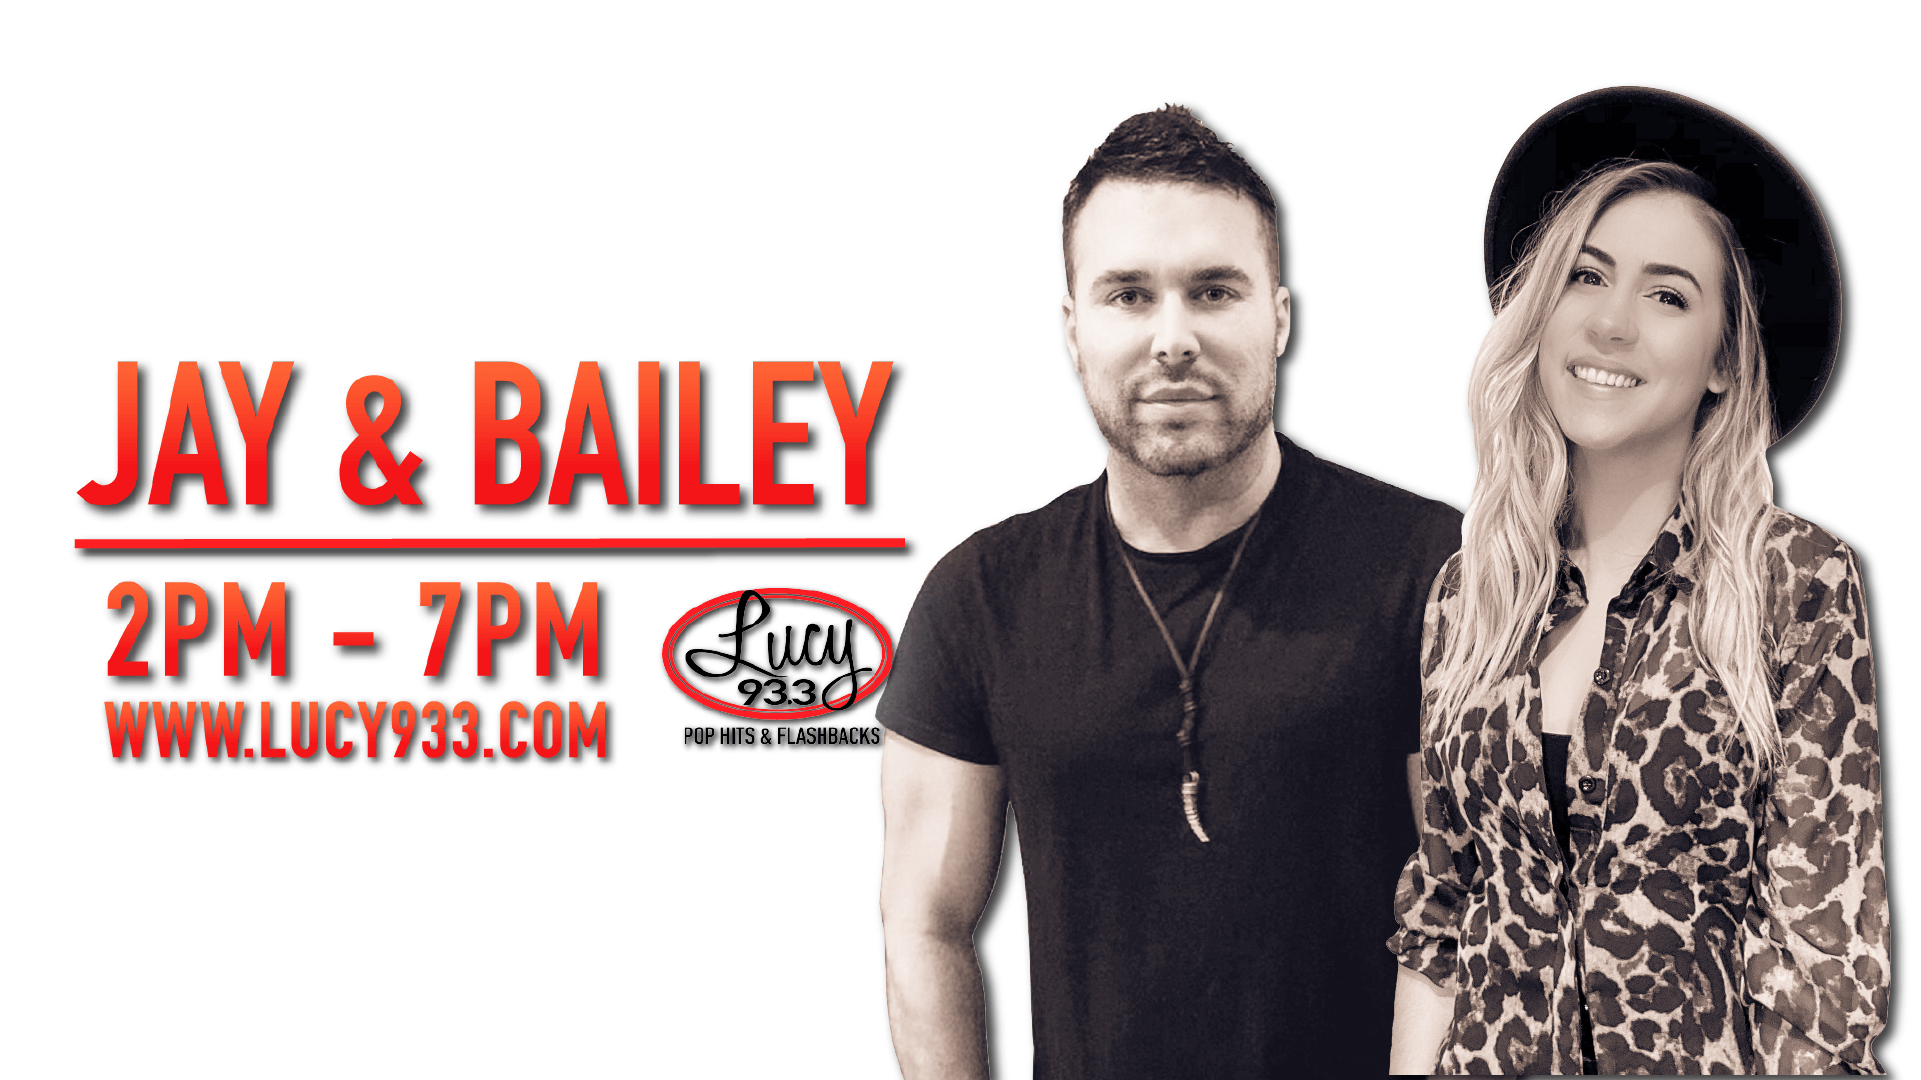 Jay & Bailey 2pm-7pm Lucy933